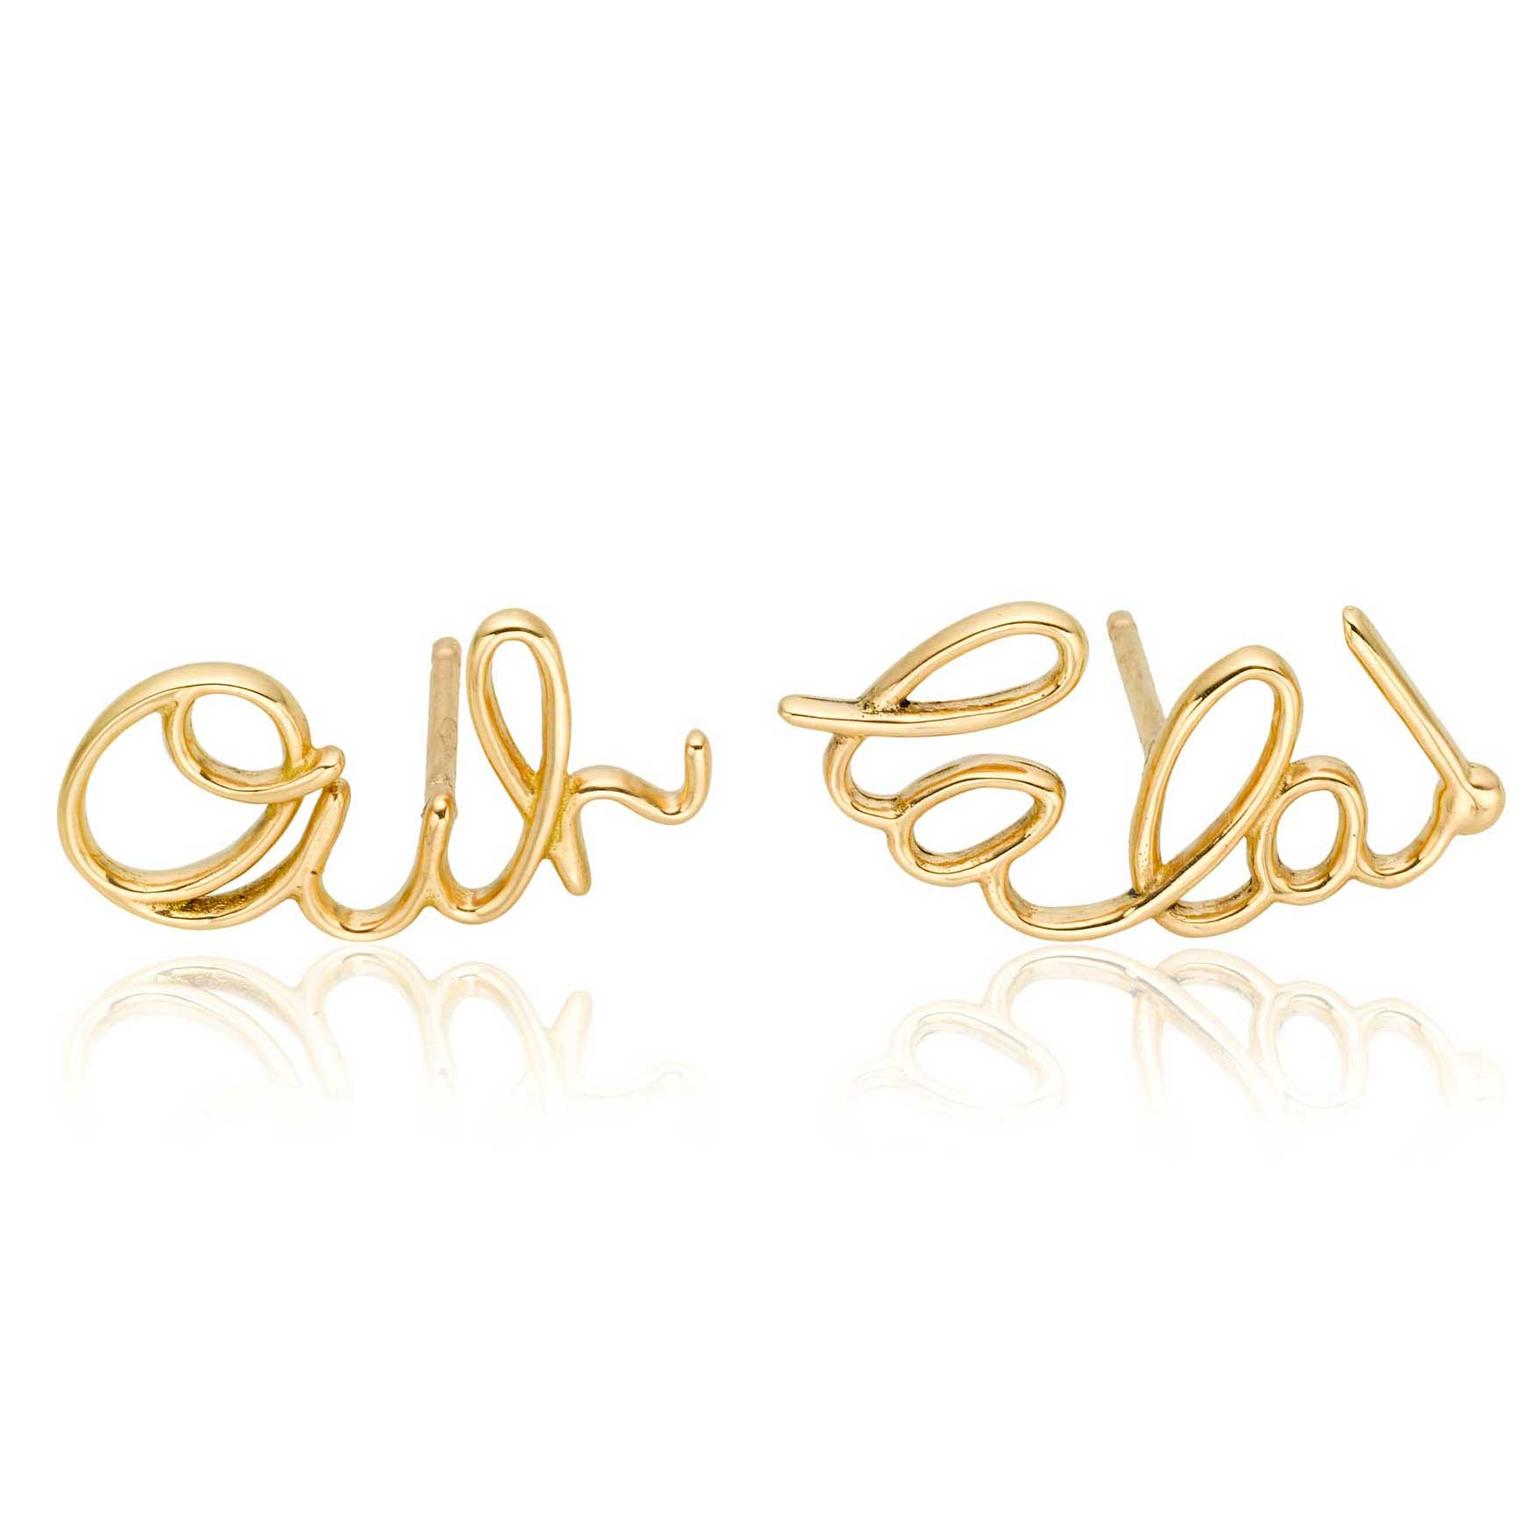 Lily Gabriella Ooh Lala earrings in yellow gold